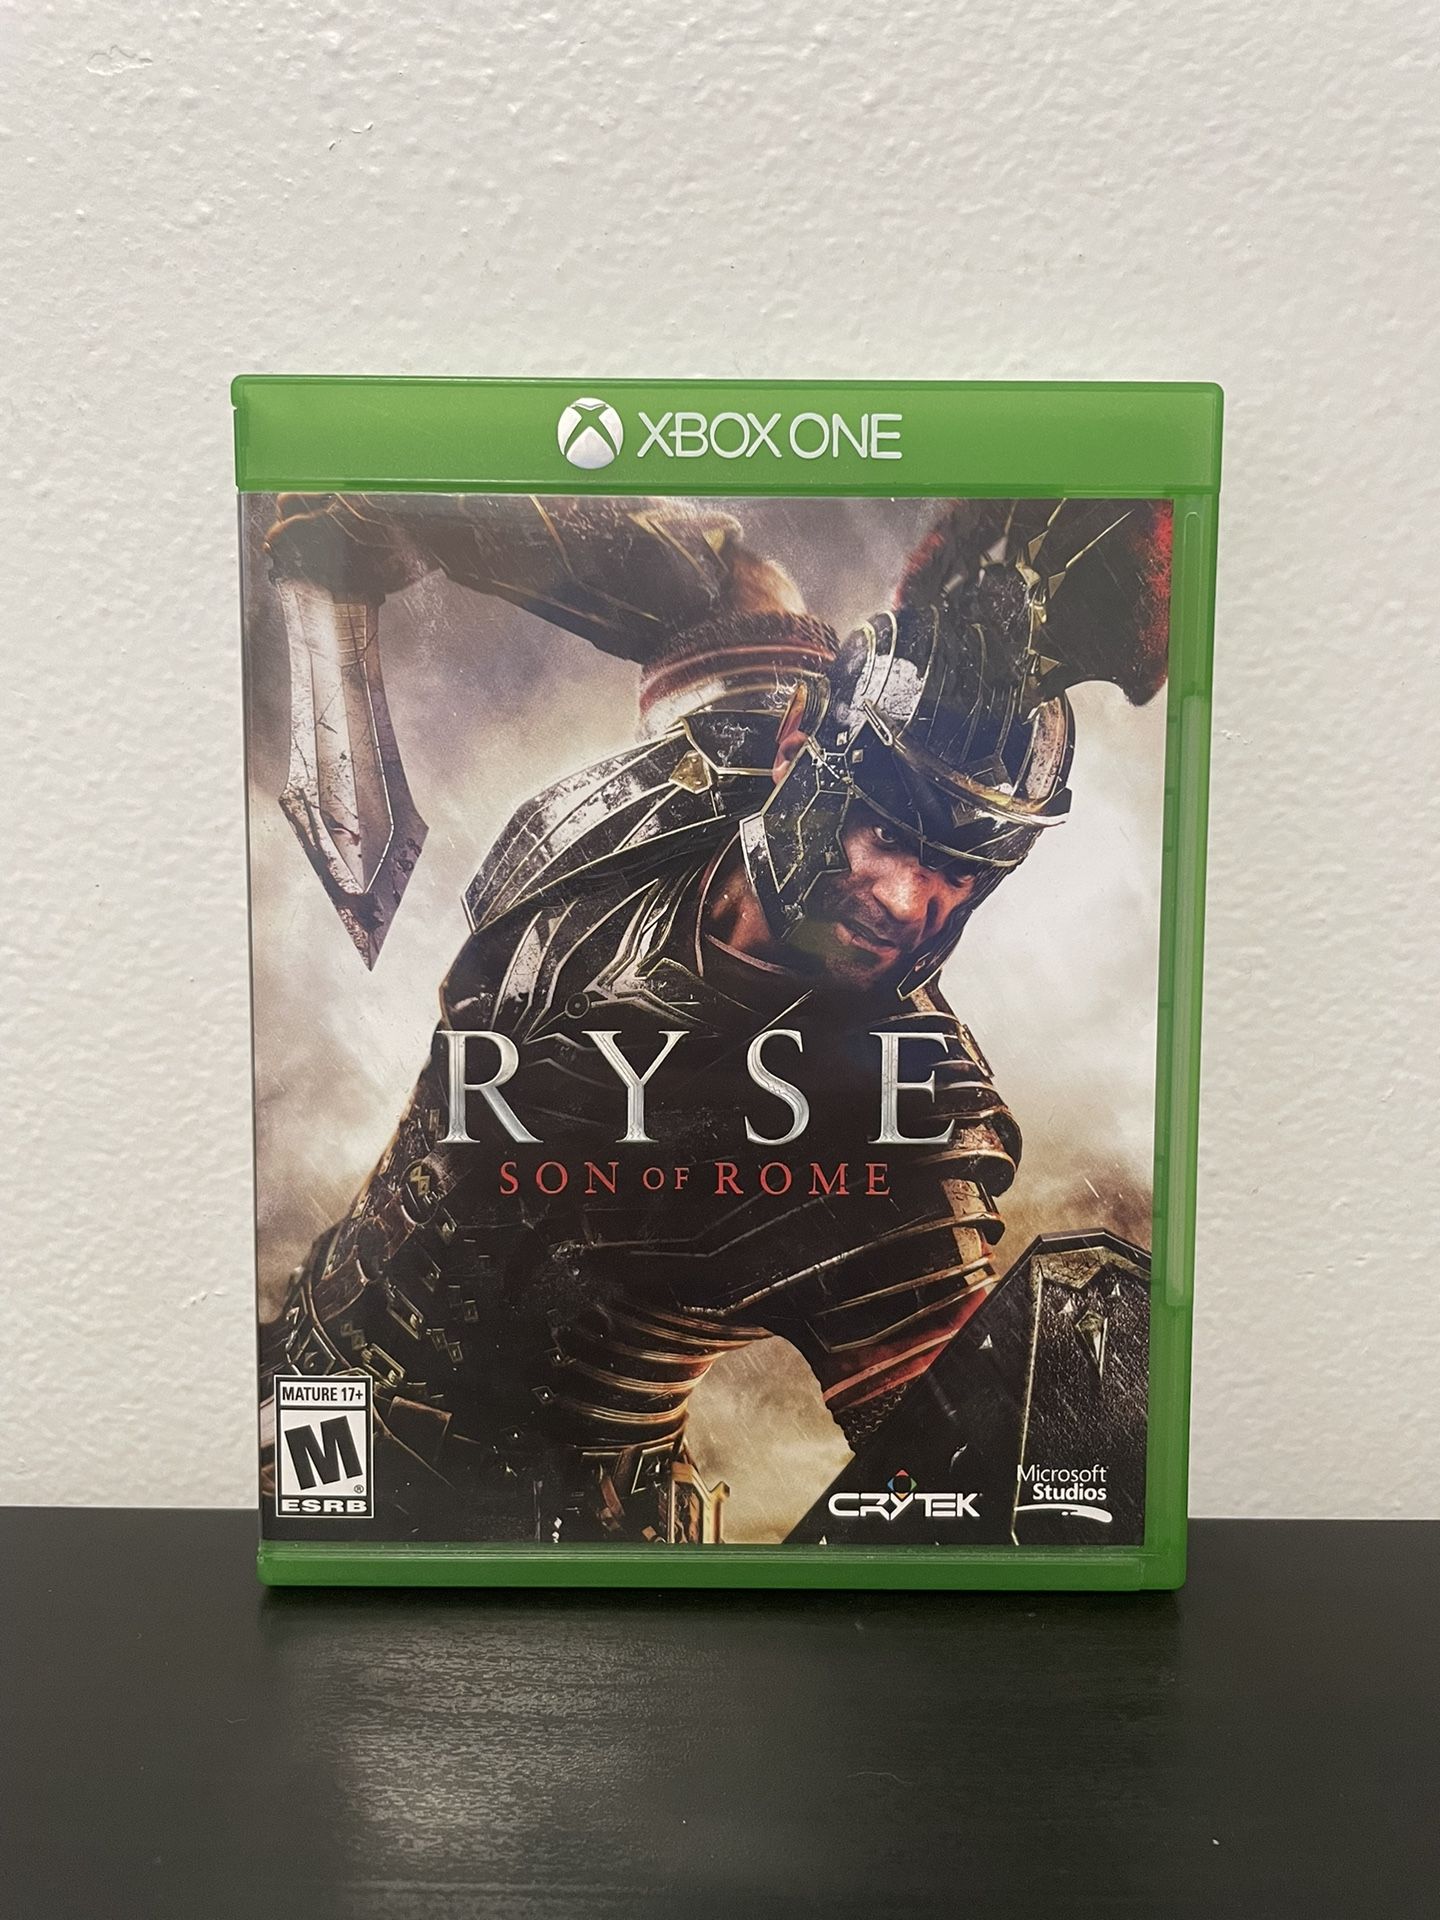 Ryse Son of Rome Xbox One Like New Microsoft Video Game Roman Soldier RPG